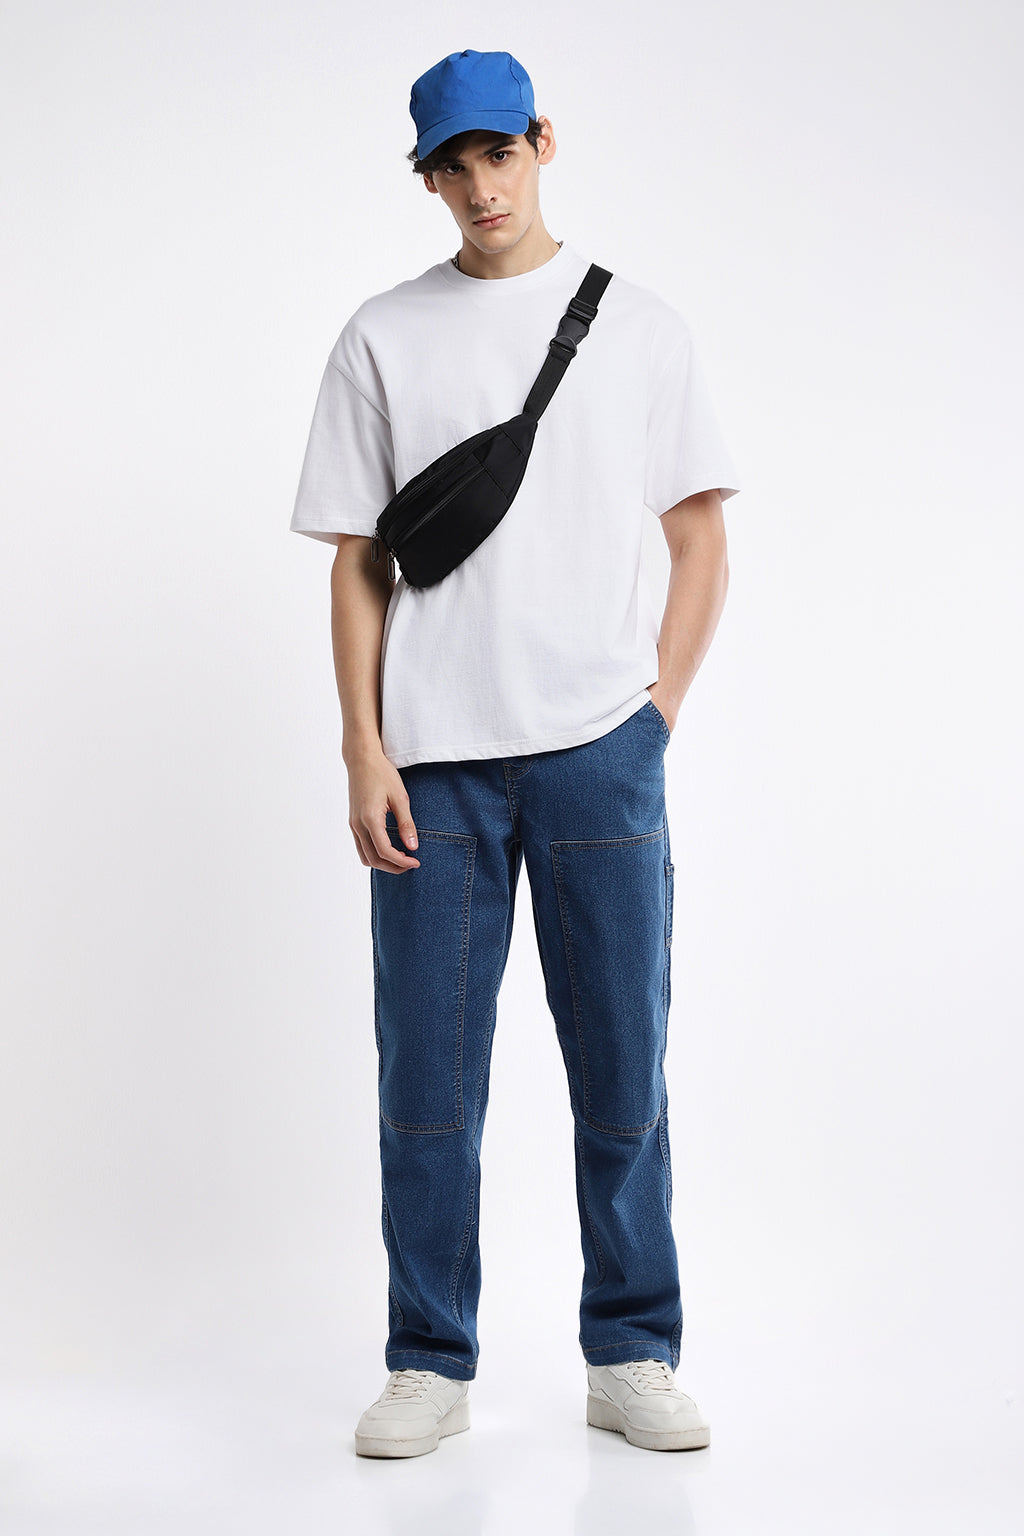 RELAXED FIT T-SHIRT